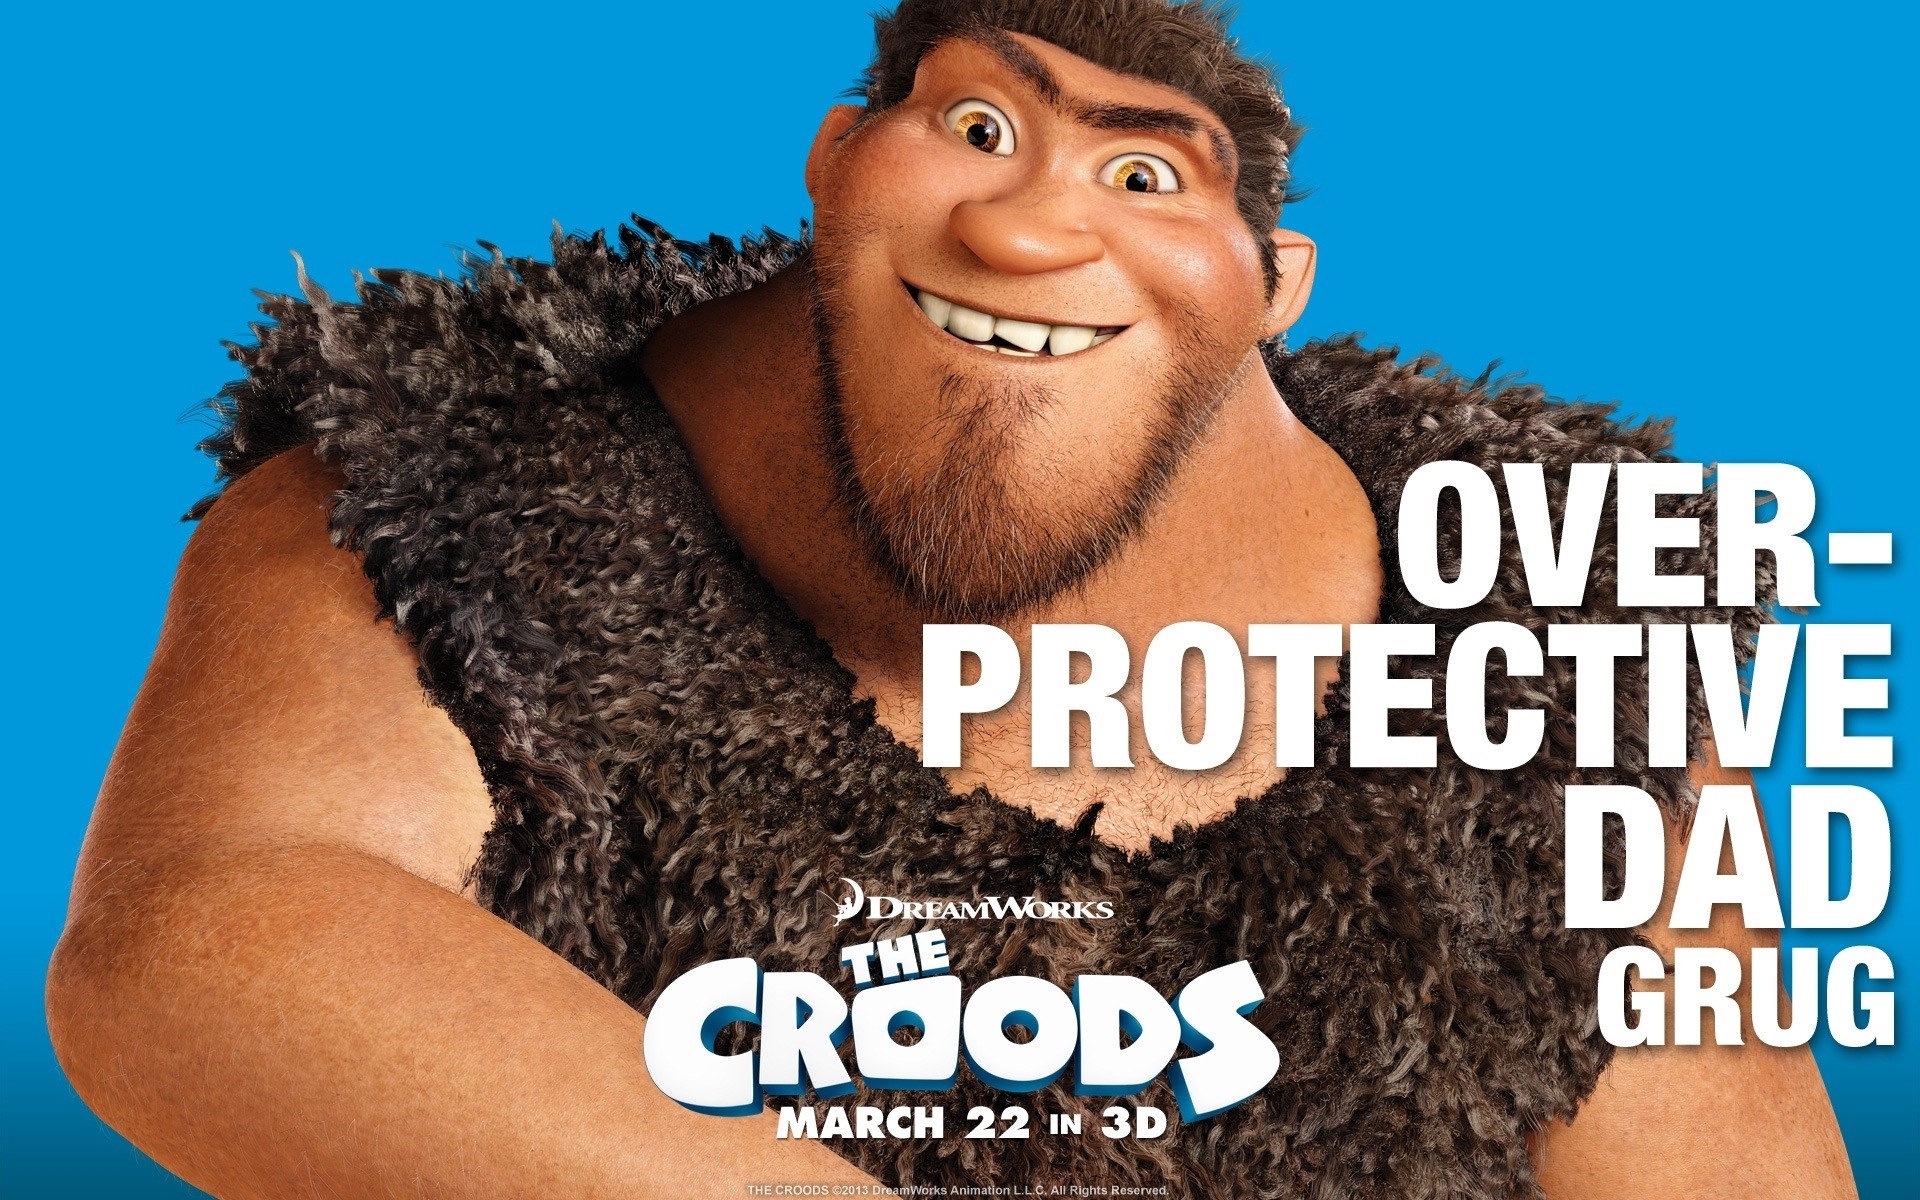 The Croods HD movie wallpapers #11 - 1920x1200